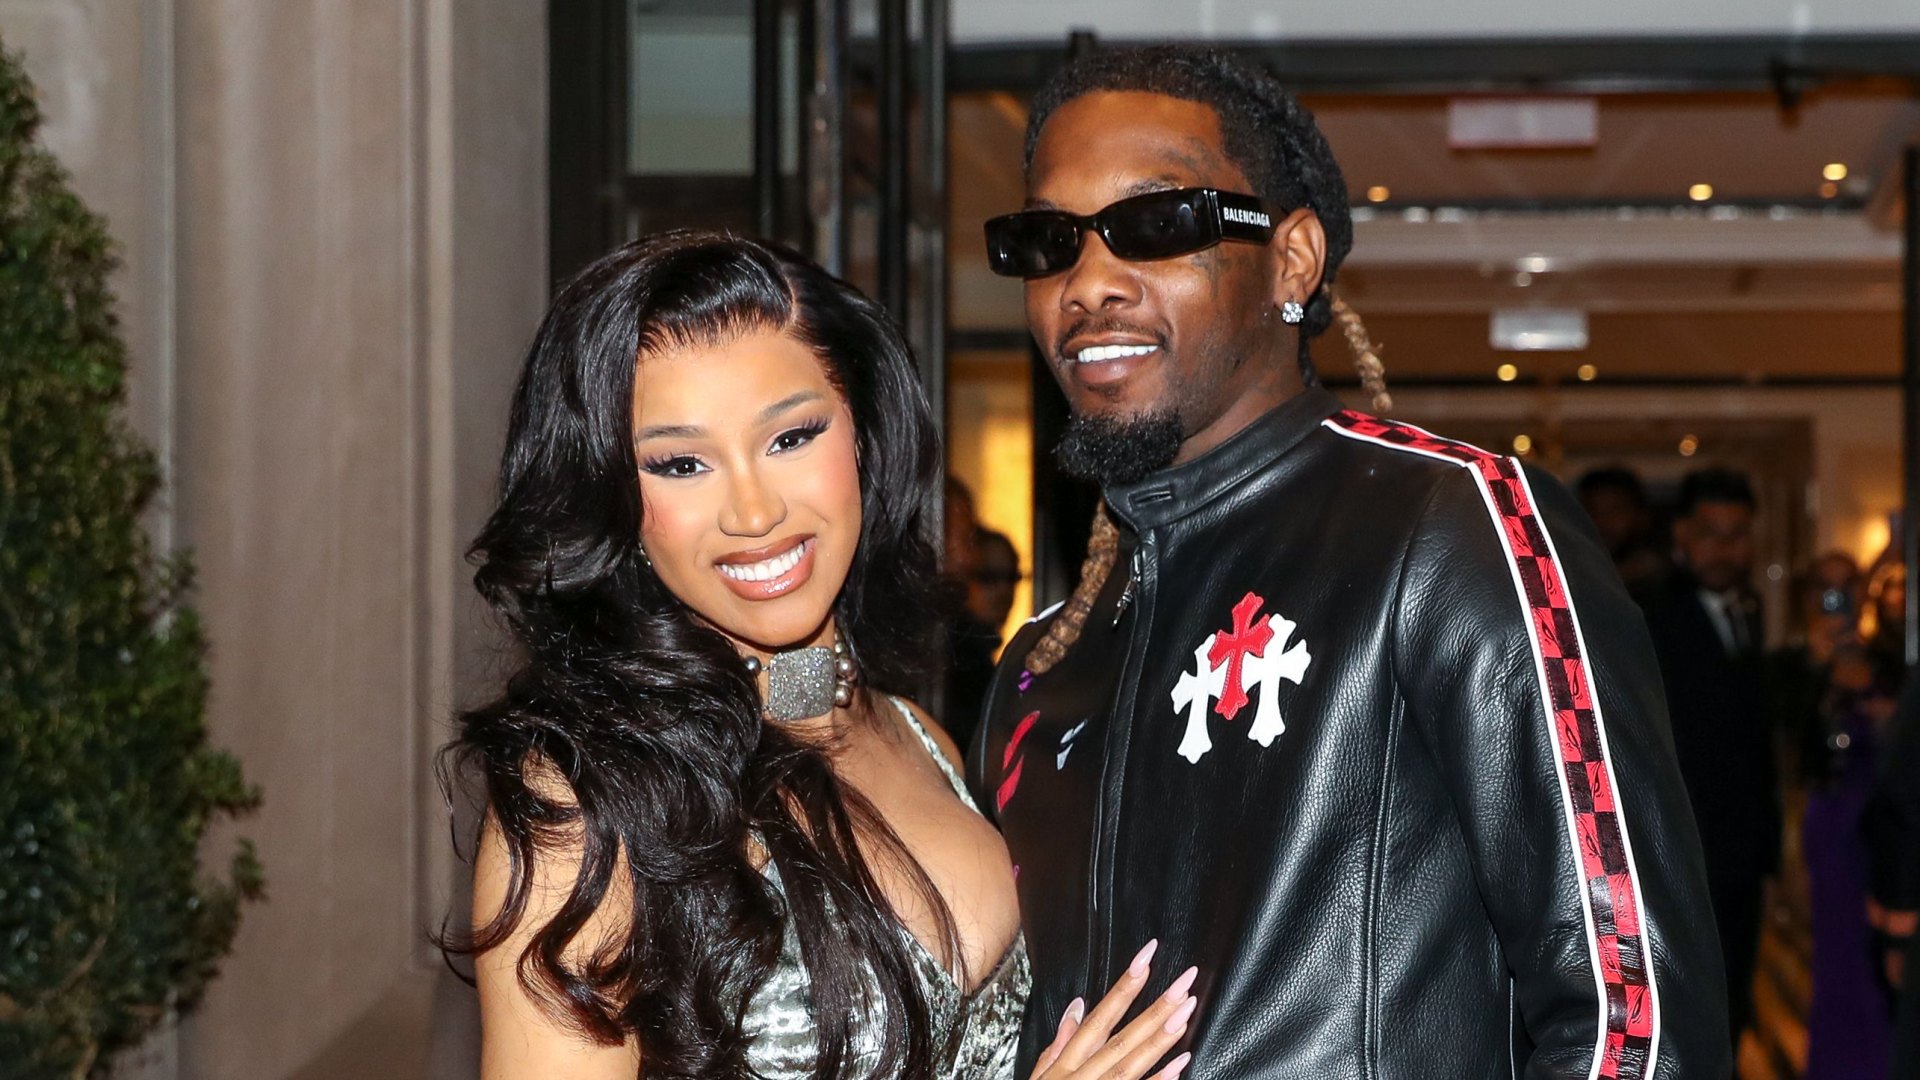 Did Cardi B Cheat on Offset? Inside Their Relationship Life & Style